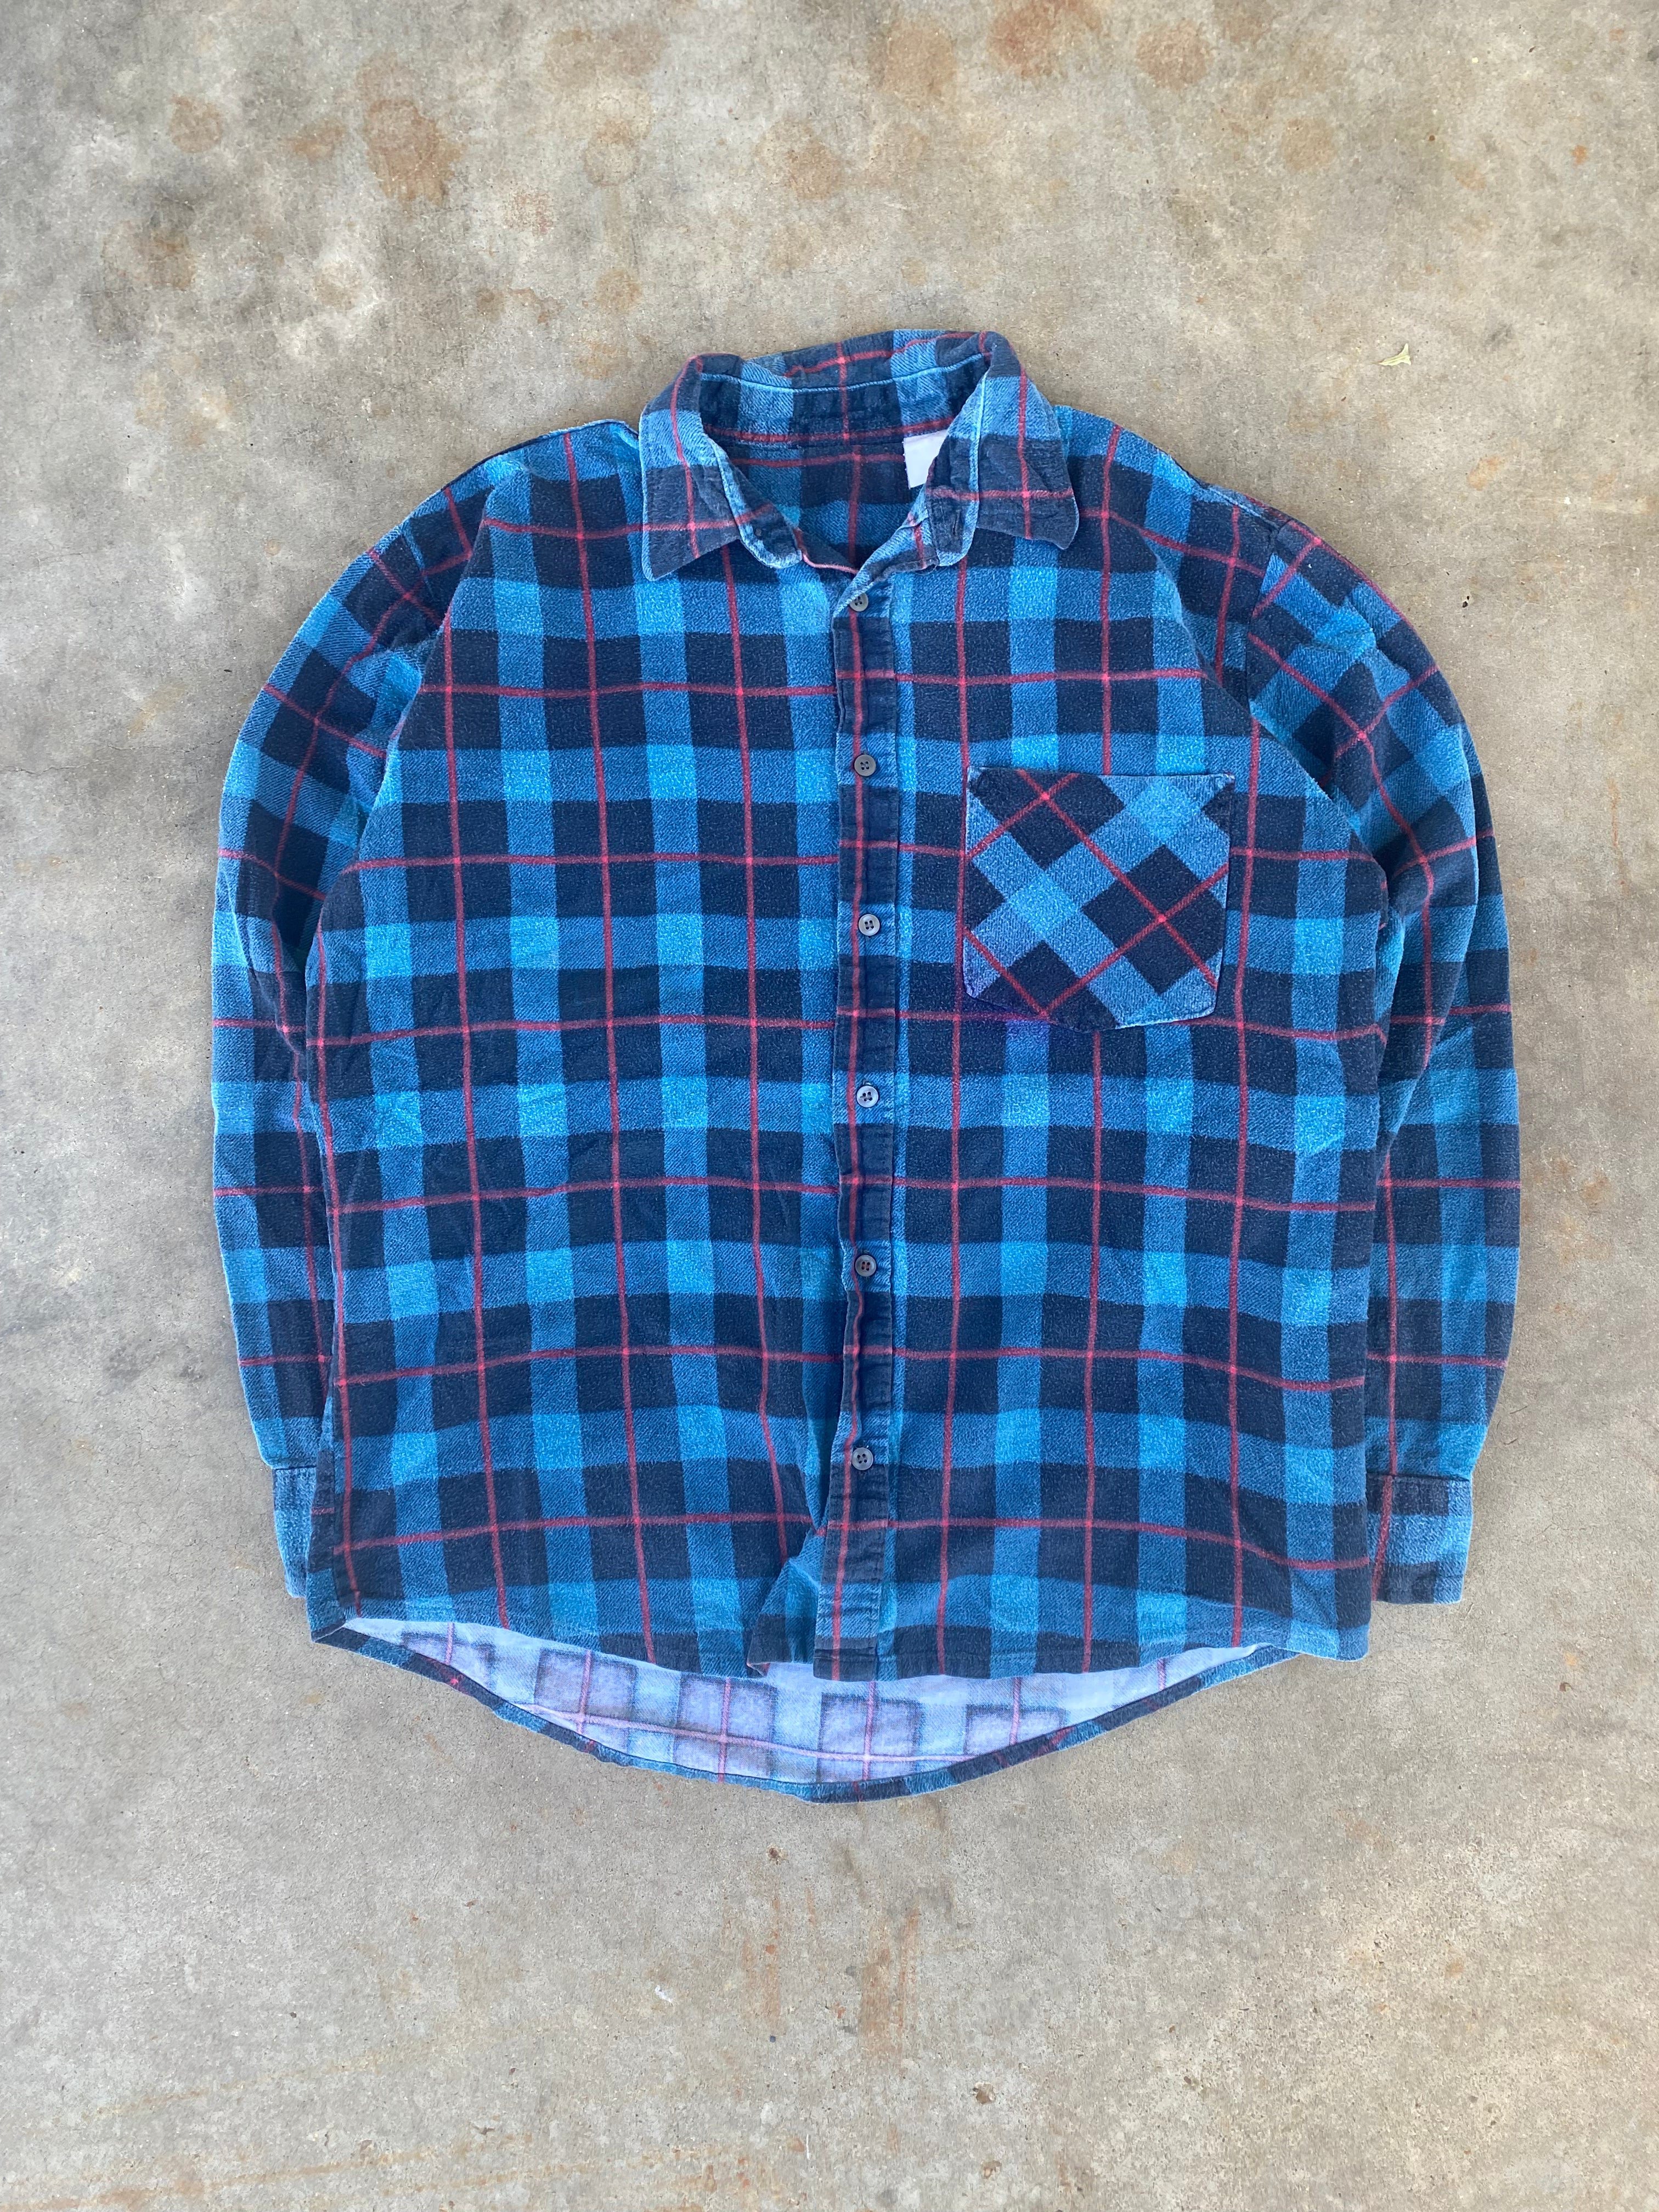 Vintage Blue Faded Flannel